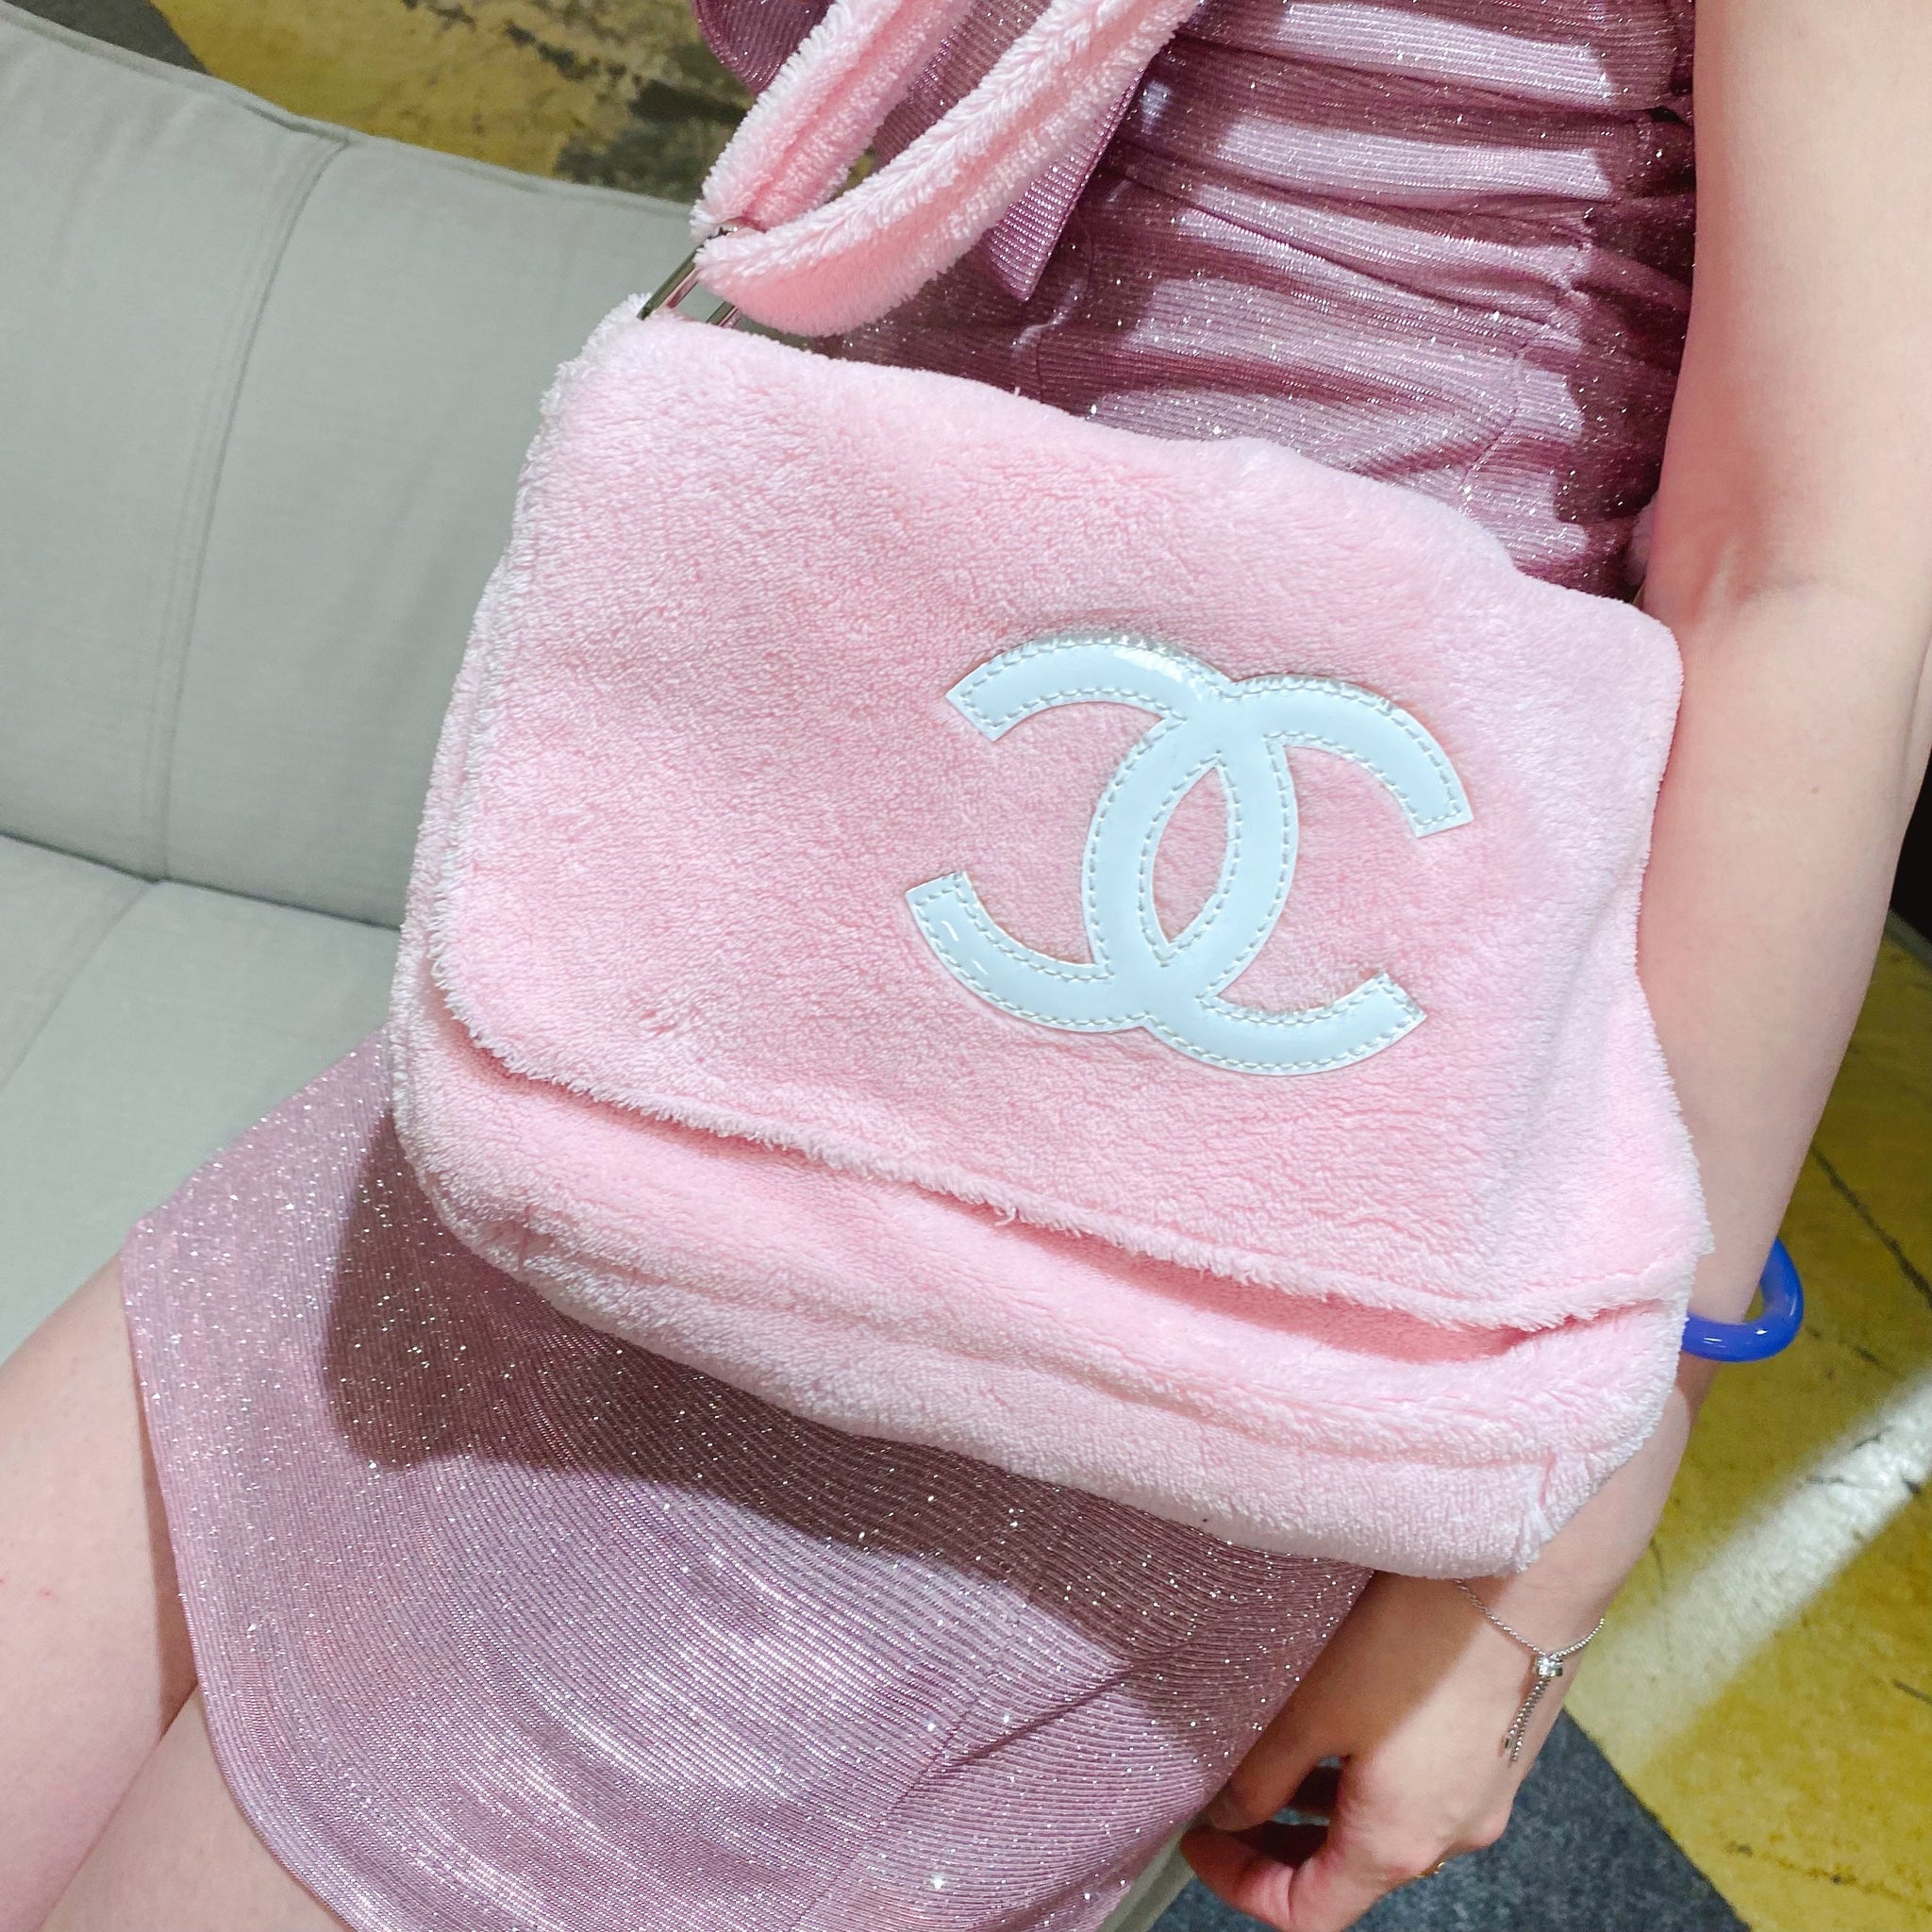 Chanel Precision VIP Bag  Which one is Real? 